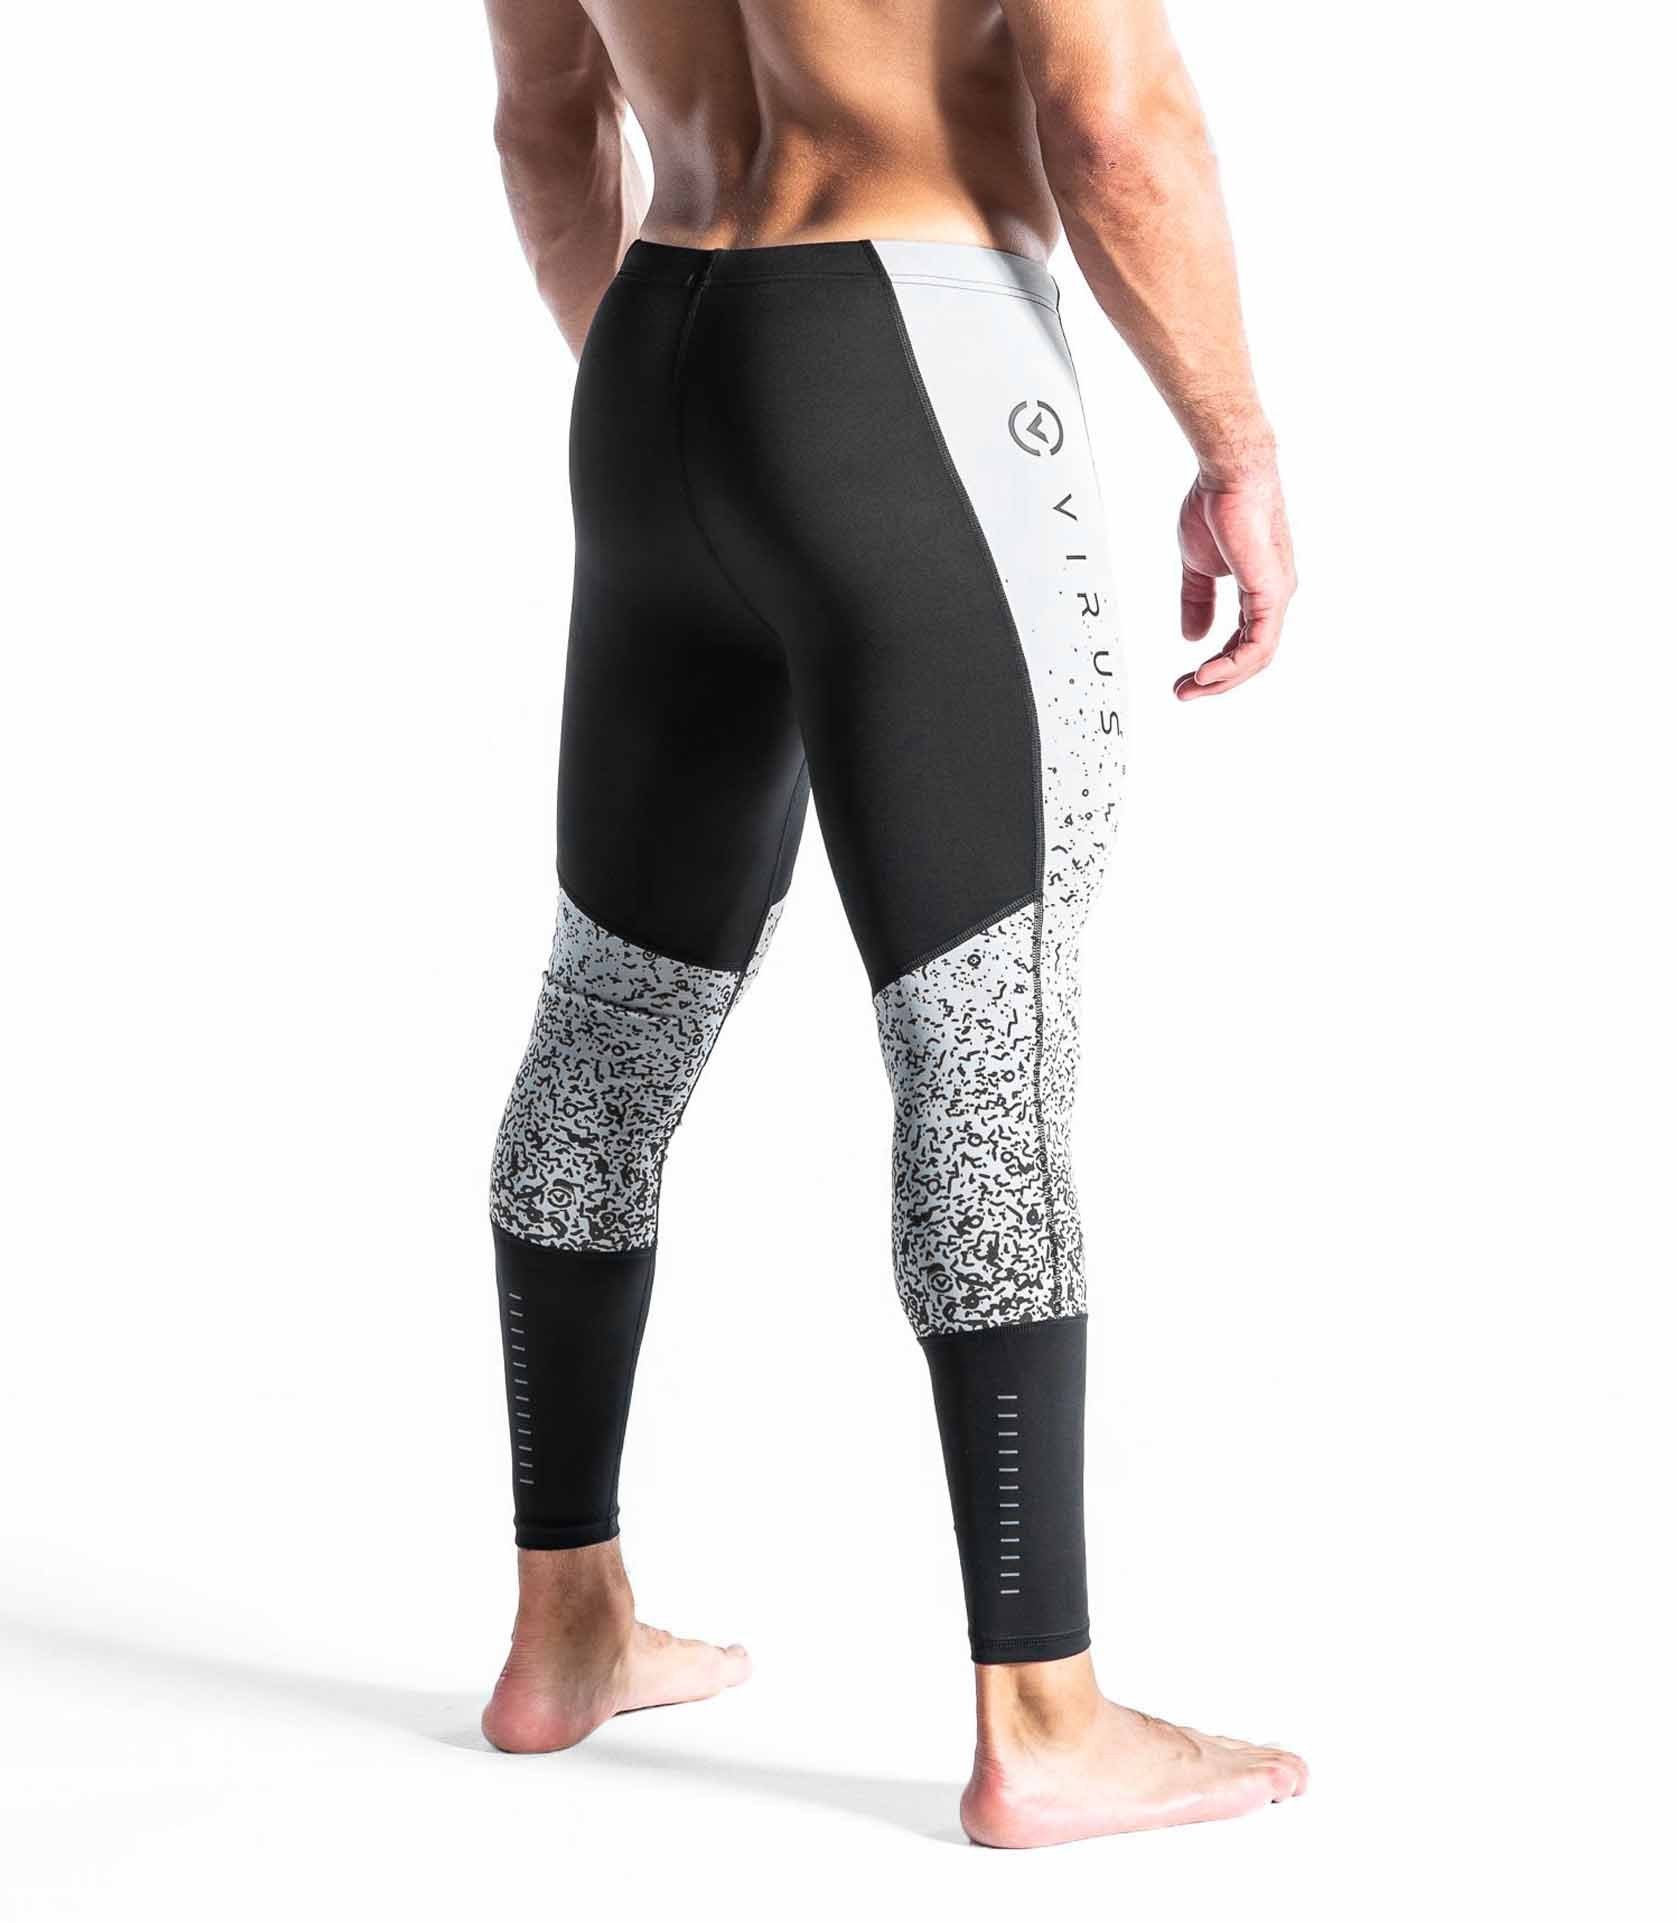 Virus Intl – Getaggt Tipologia_Leggings e compression– Apes Lab